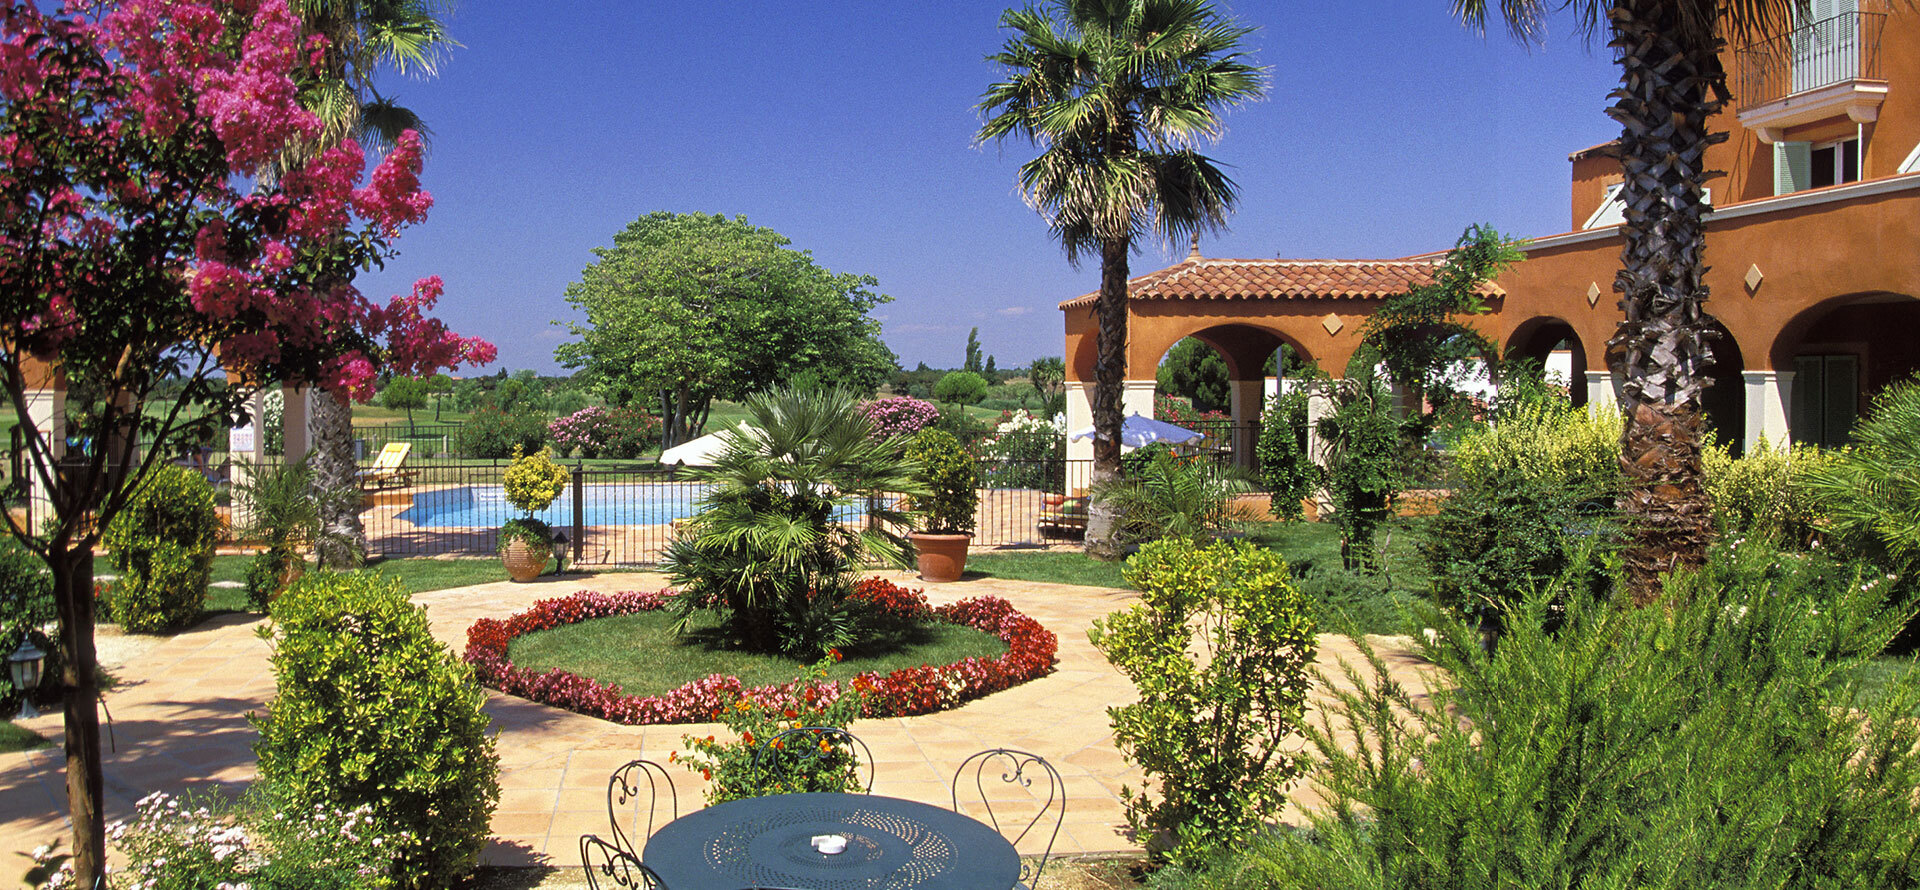 Overview of the location of the Palmyra Golf Hotel in Cap d’Agde